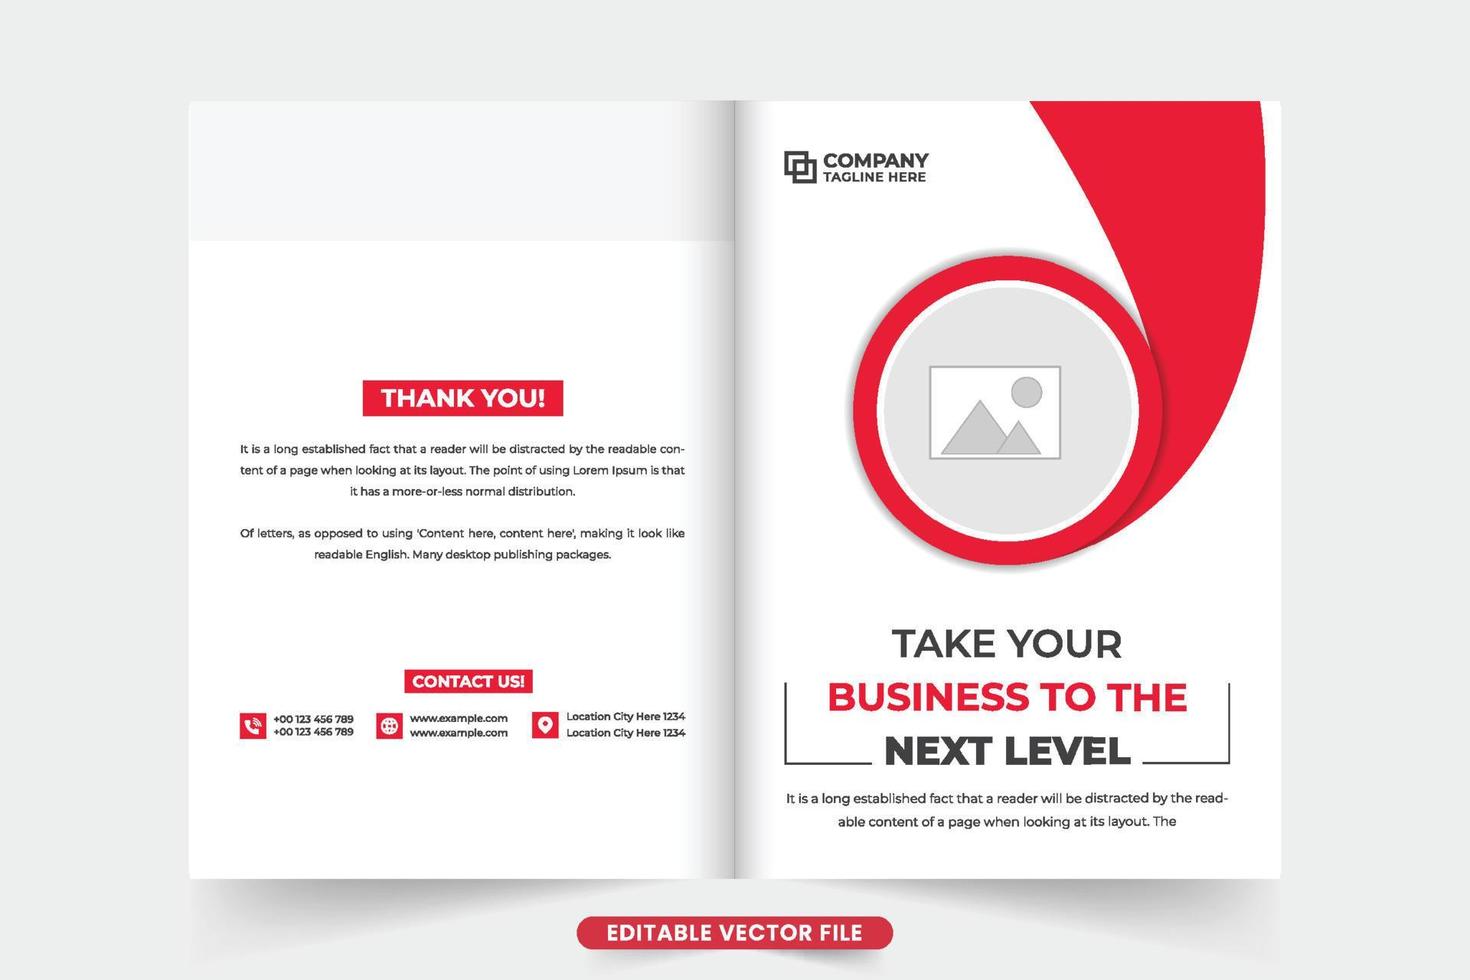 Creative business portfolio cover design with photo placeholders. Modern corporate company promotional magazine cover layout with red and dark colors. Business proposal and company overview cover. vector